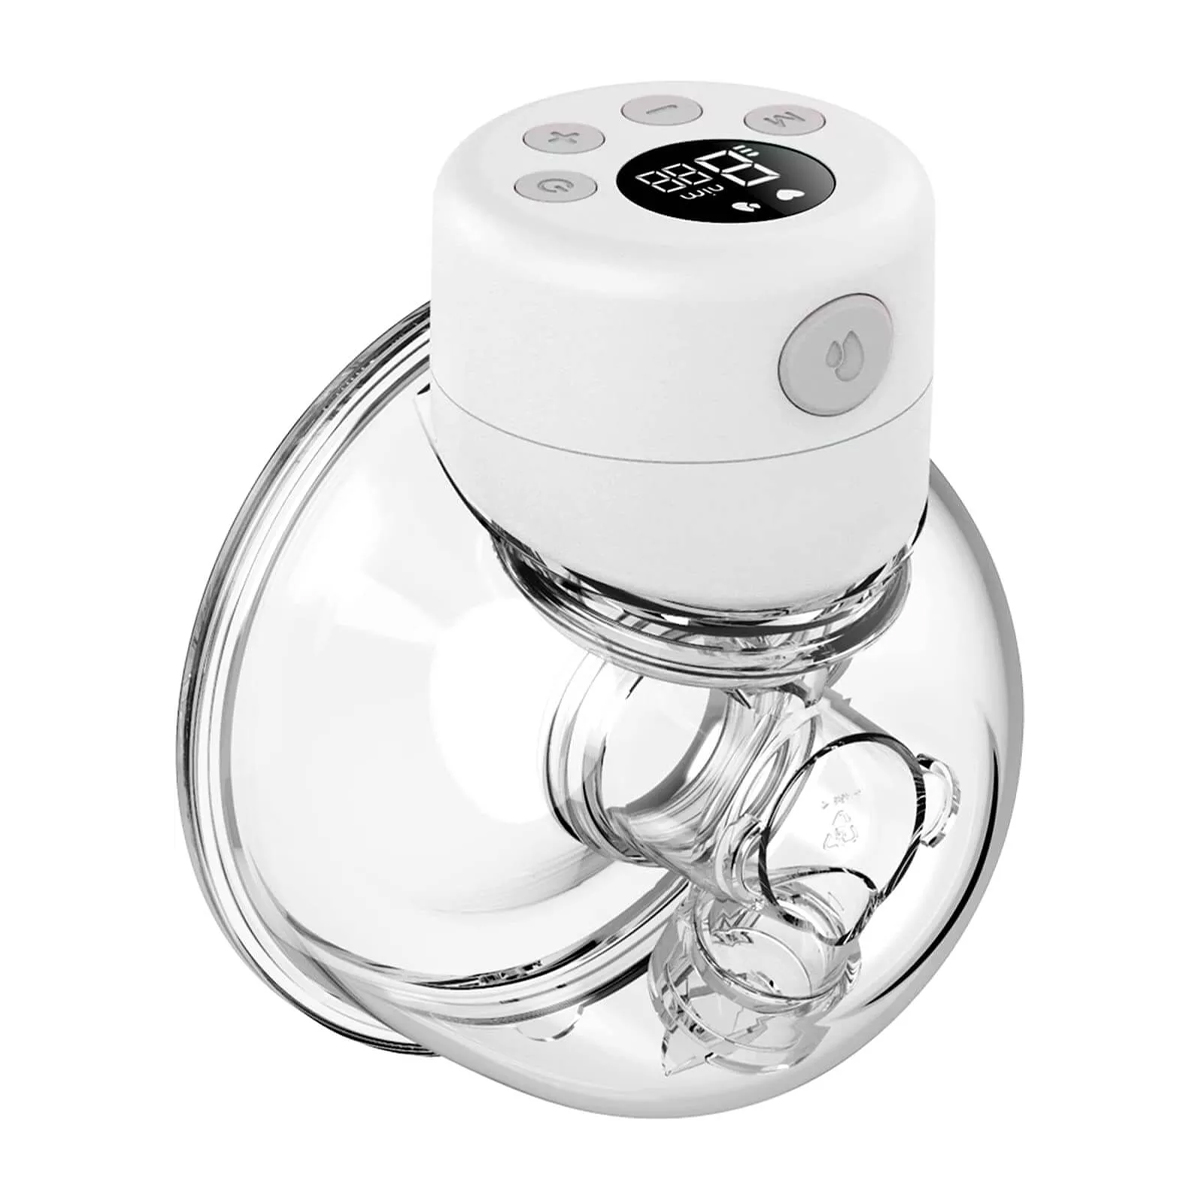 S12 Wearable Electric Breast Pump Hands Free 9 Levels LED Display